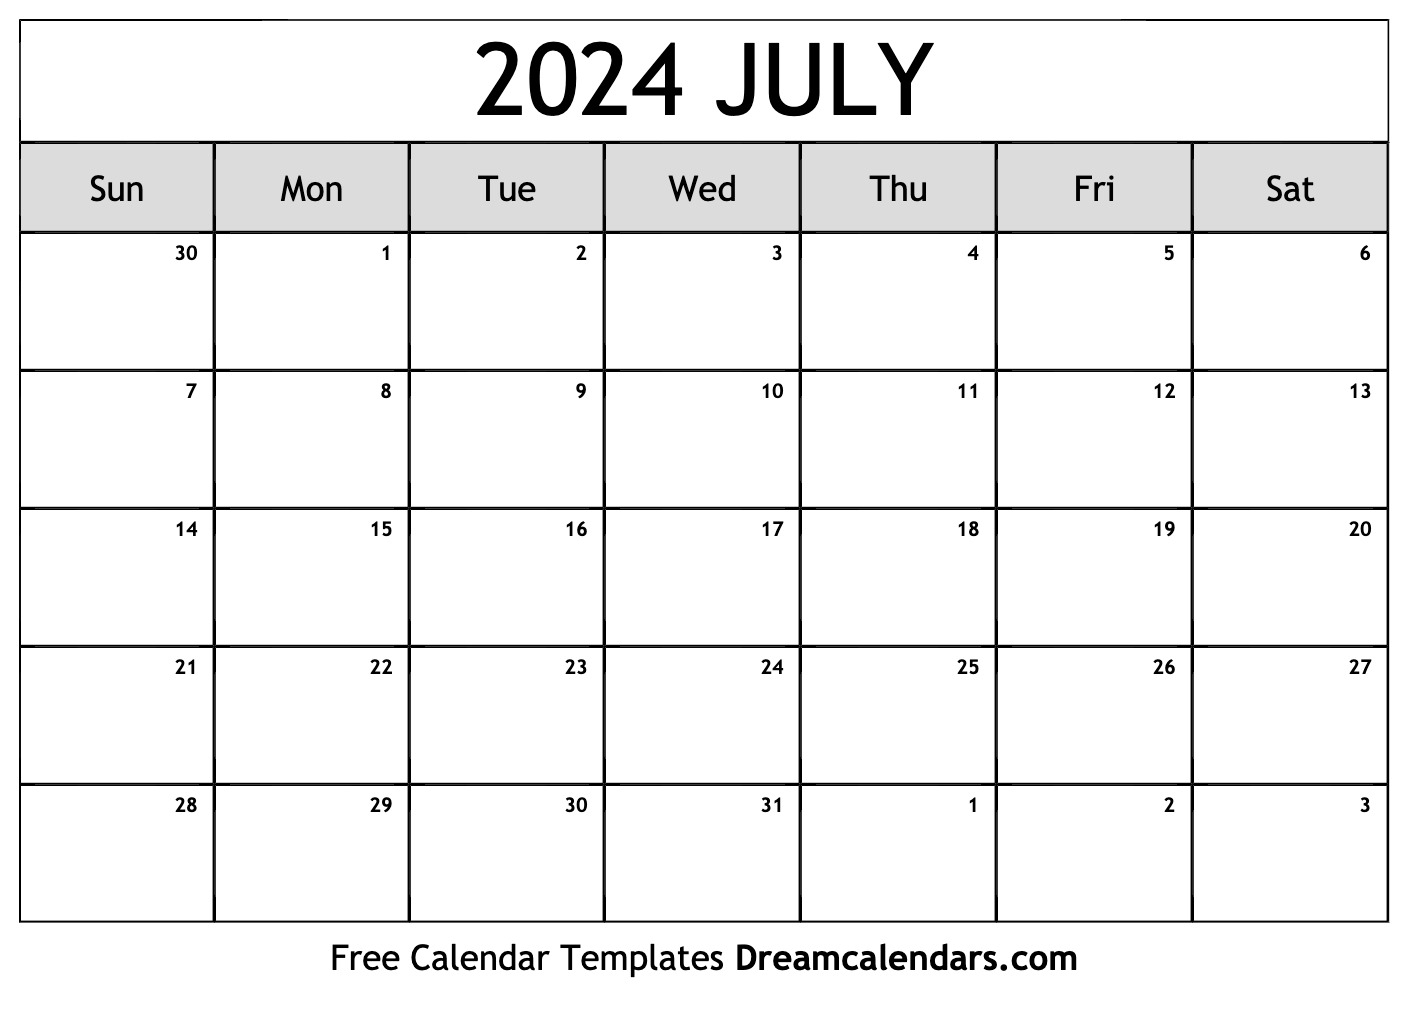 July 2024 Calendar | Free Blank Printable With Holidays for Free July Calendar 2024 Printable